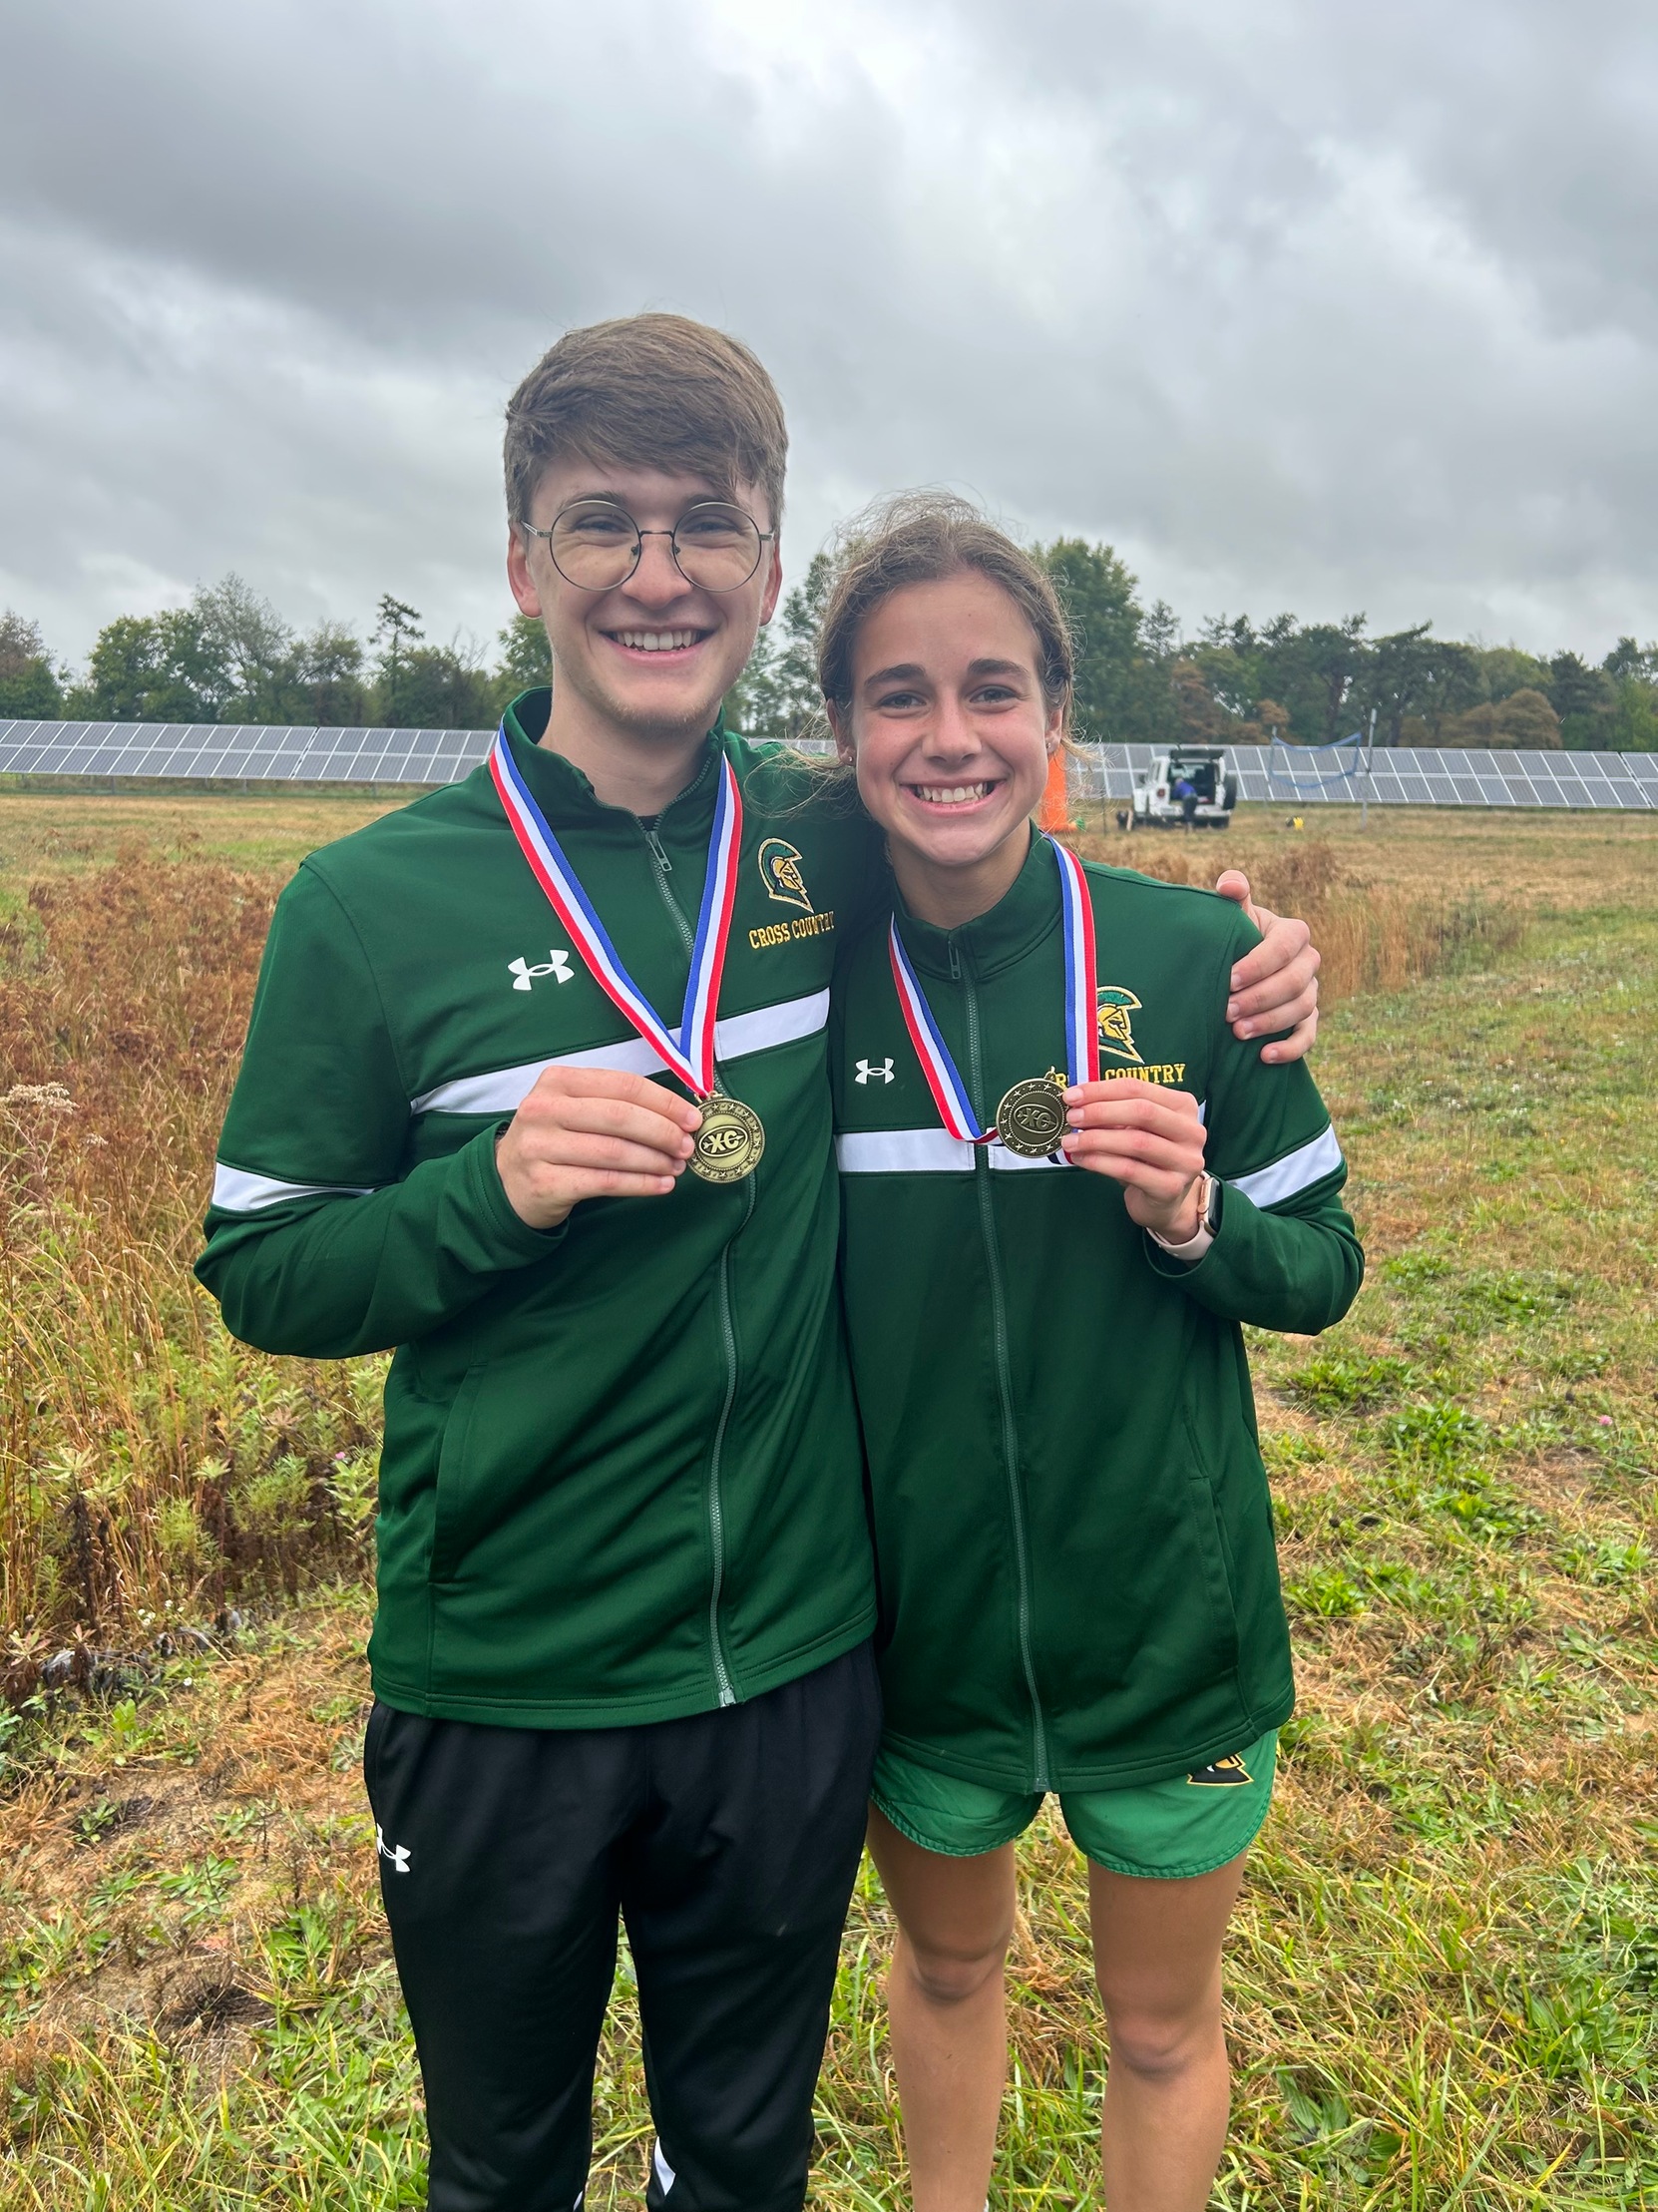 Andrew Hardy and Annette Fare holding medals at Charger Invitational.